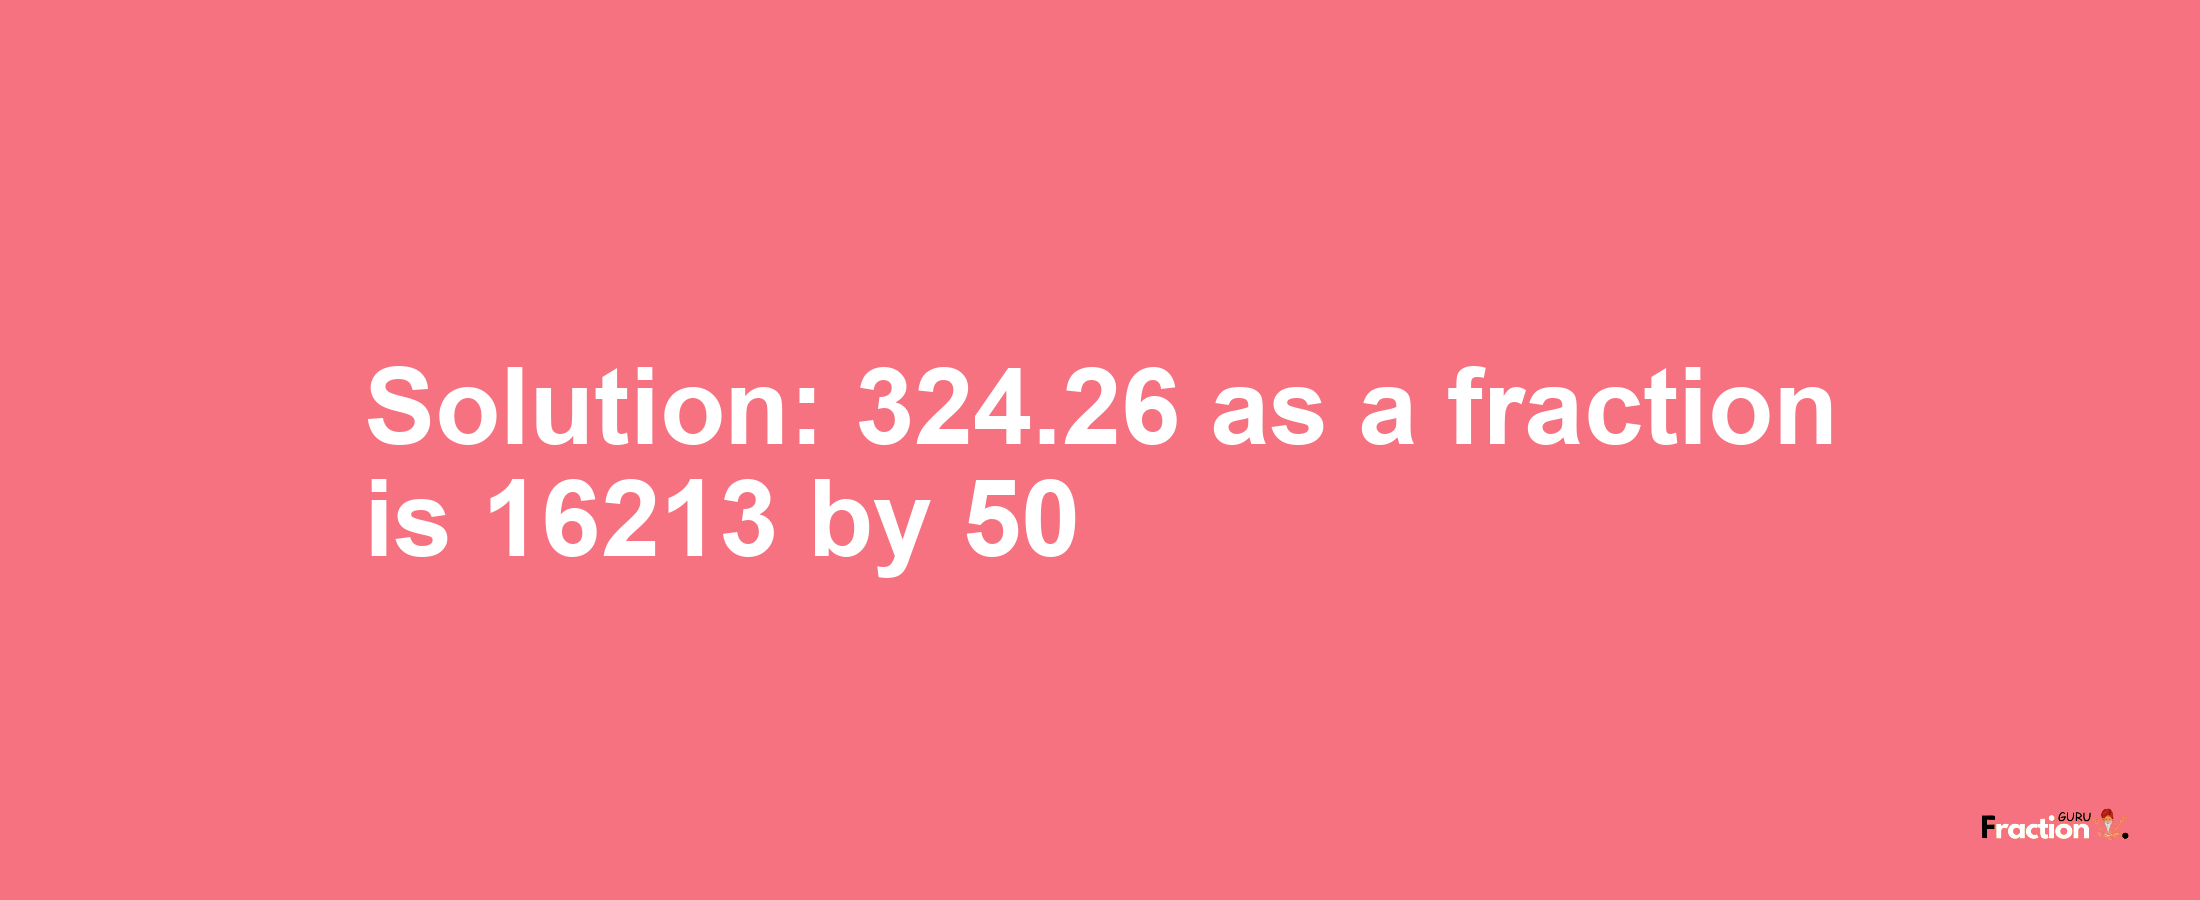 Solution:324.26 as a fraction is 16213/50